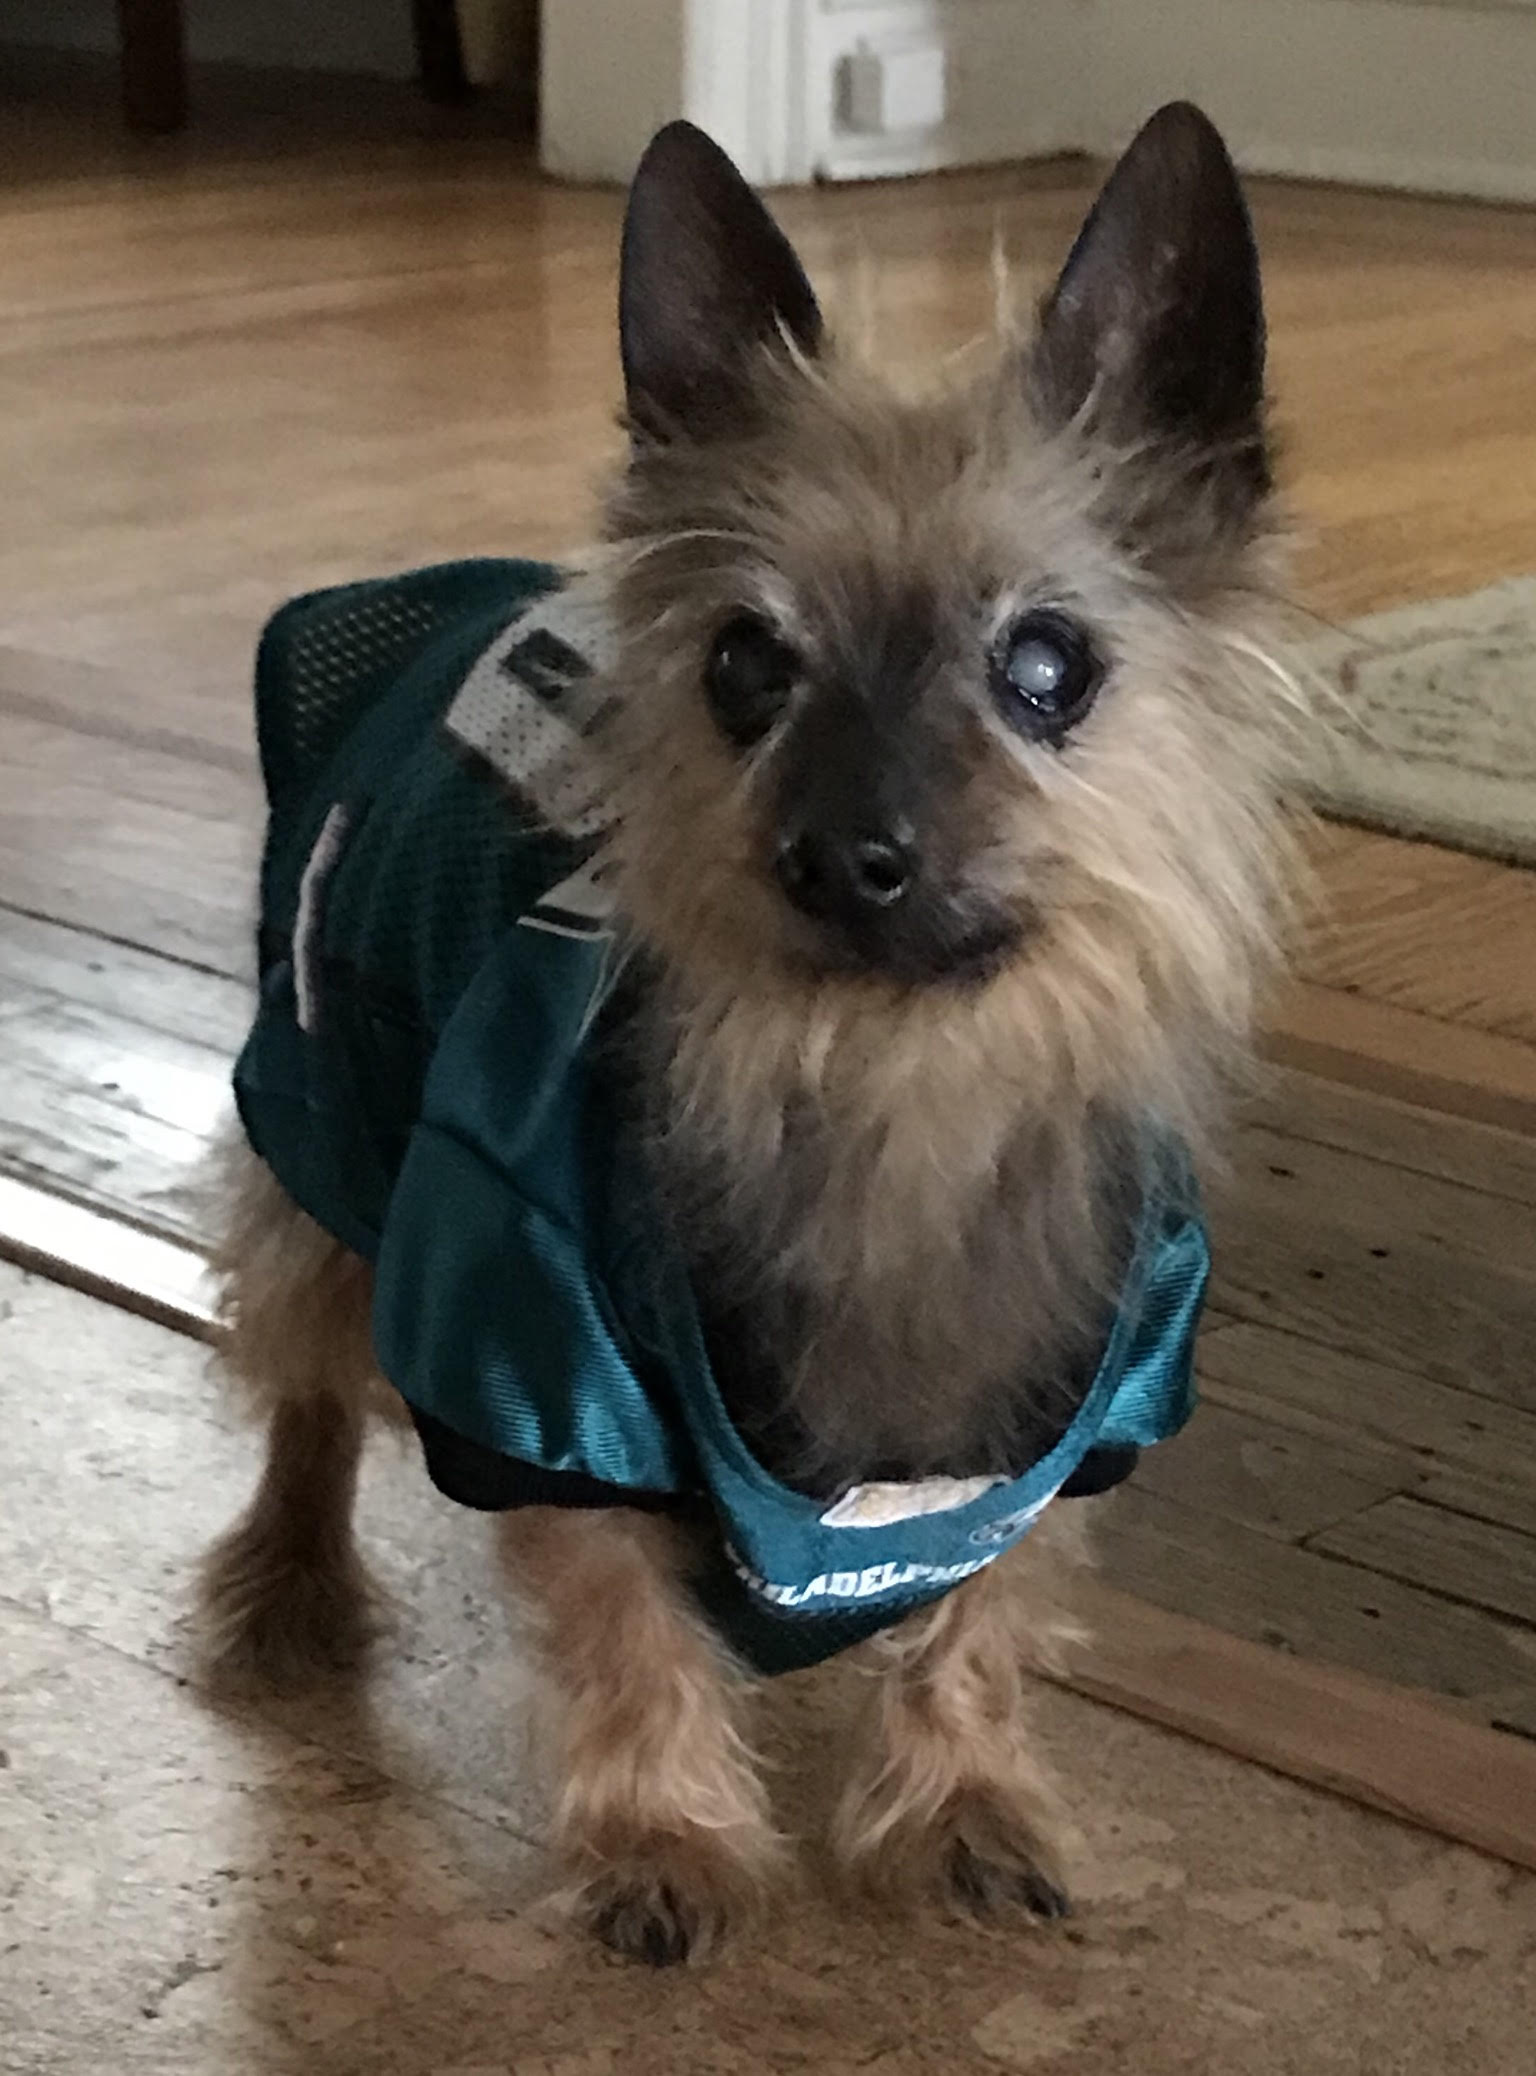 Lulu in Chestnut Hill wants to be held by Jason Kelce. She would look so tiny in his arms! Credit: Queenie's Pets.